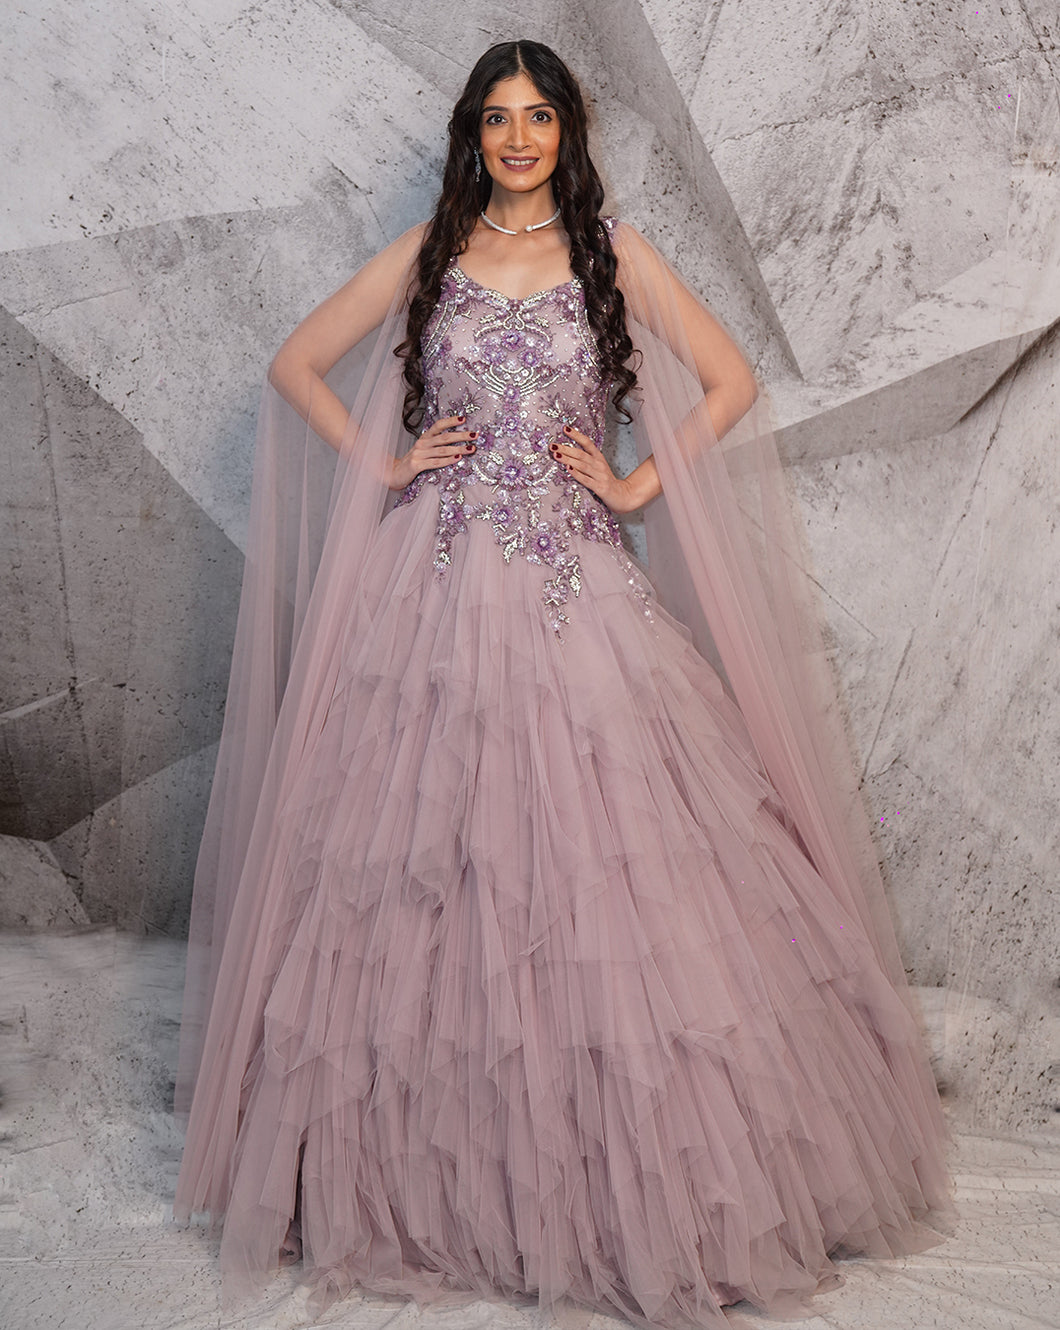 The Lavender ruffle gown